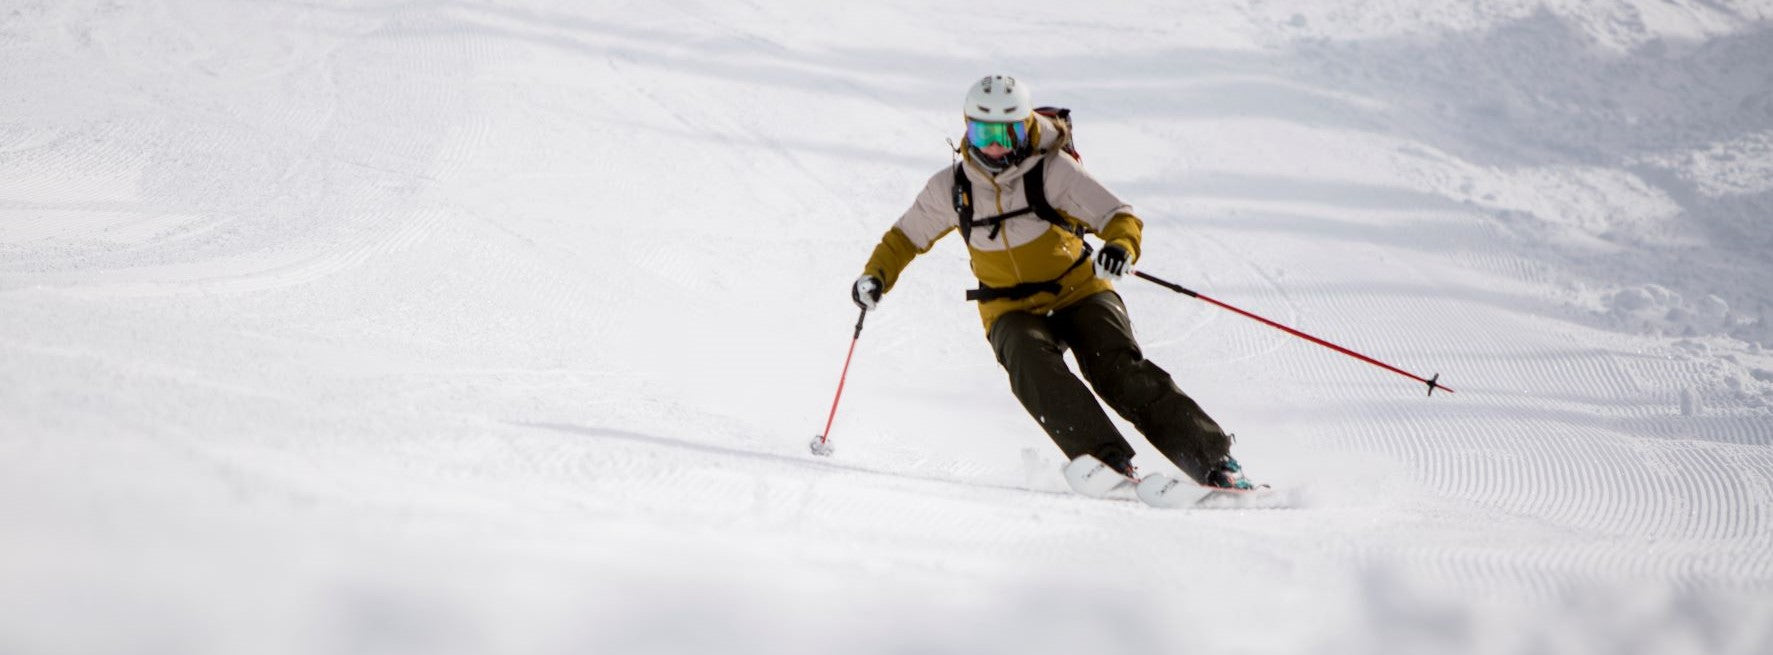 skier downhill skiing and holding poles